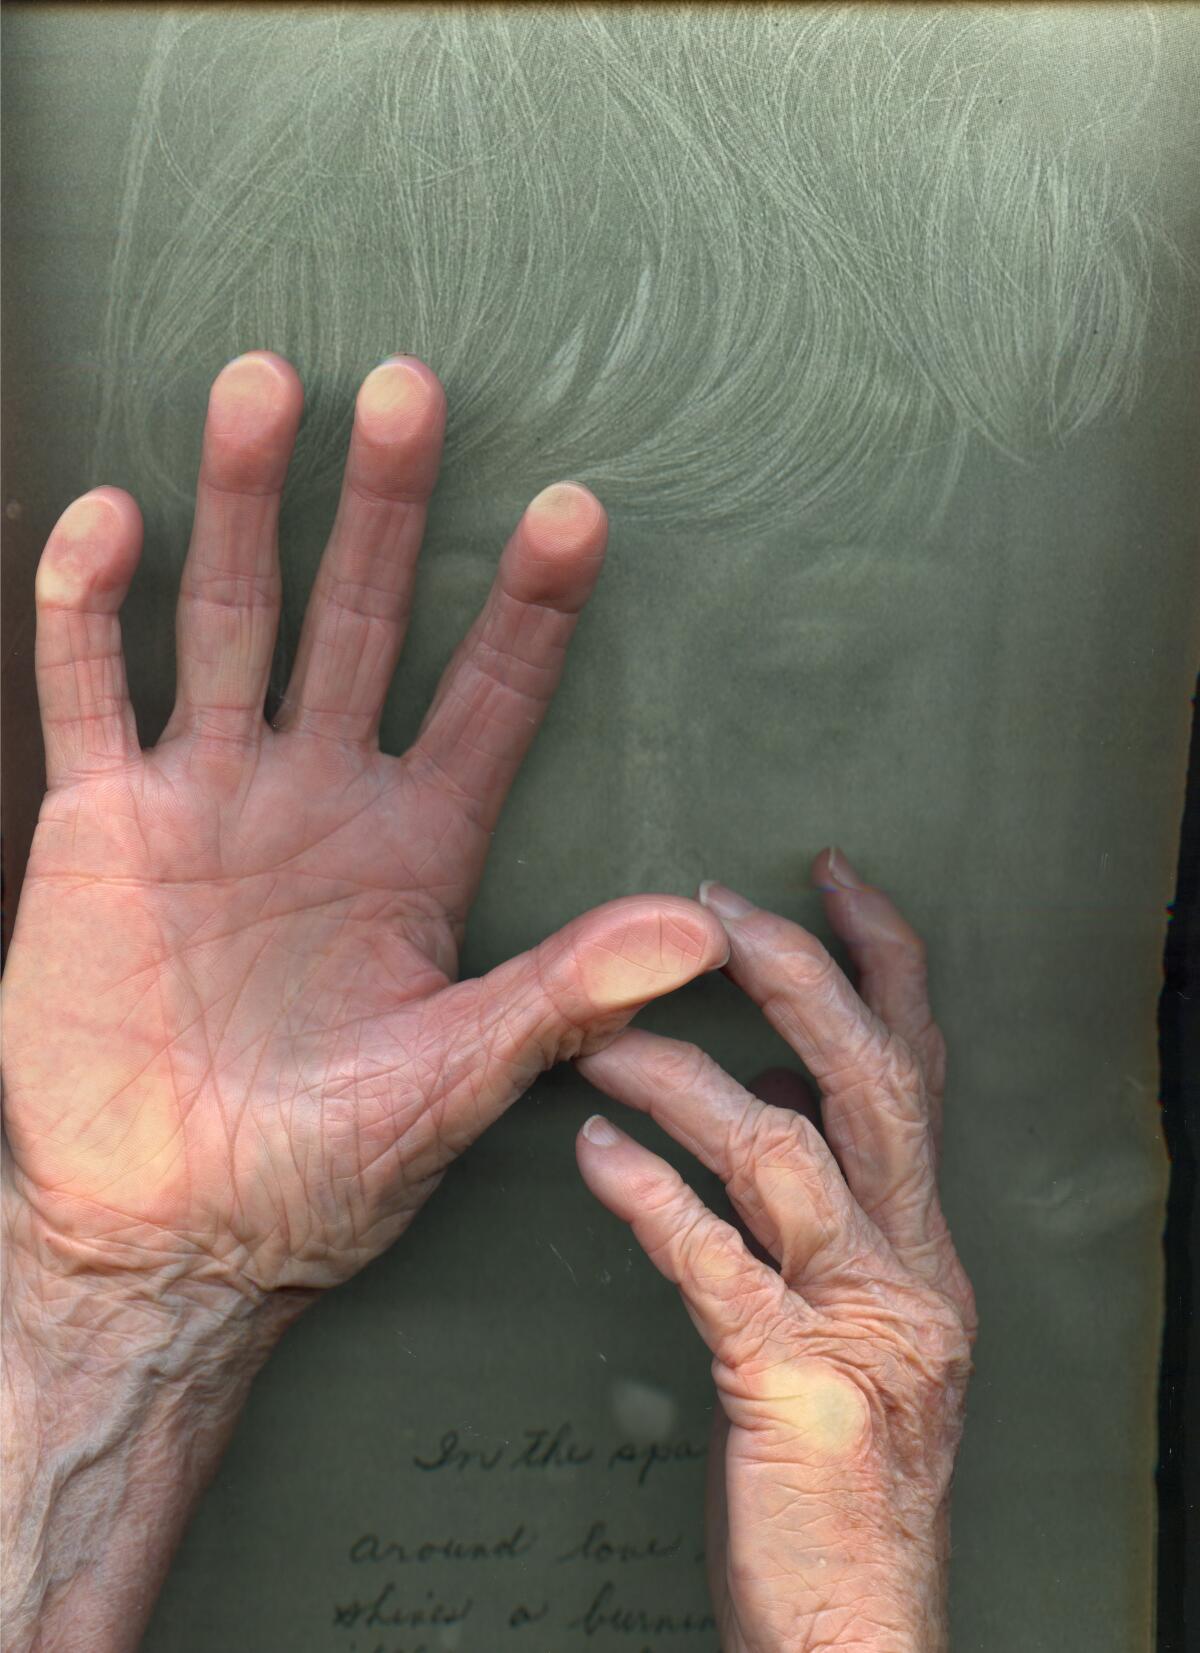 A vertical image shows the ghostly outline of aface before which are a pair of old woman's hands